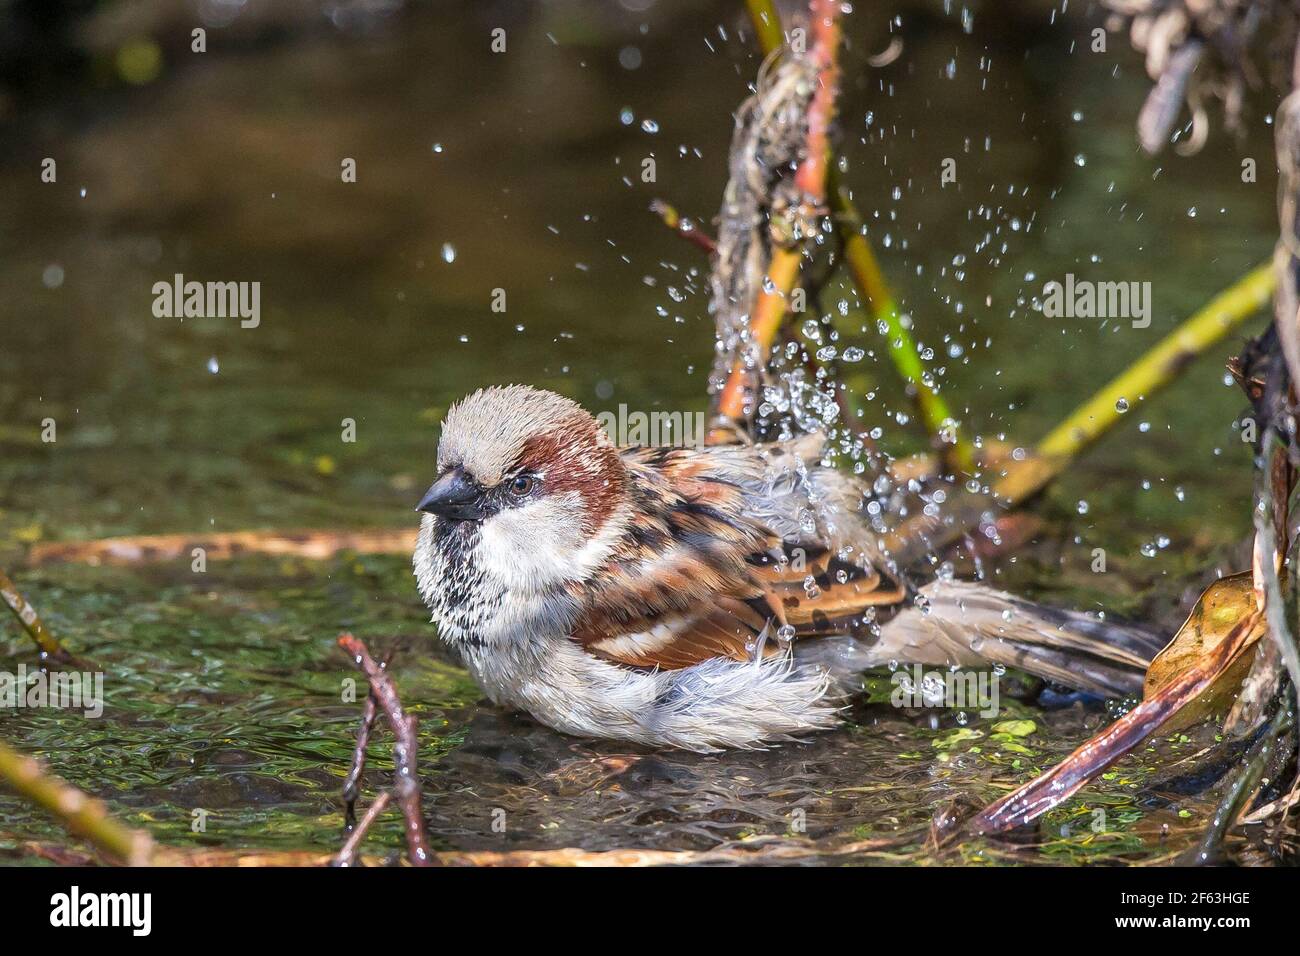 Kidderminster, UK. 29th March, 2021. UK weather: as British Summer Time begins, the local wildlife is busy taking a well-deserved spring clean today in the unseasonably warm weather. Birds are sprucing up their feathers ready for some springtime action and this male house sparrow knows he must take a bath and be in prime condition to ensure his attraction to a potential mate! Credit: Lee Hudson/Alamy Live News Stock Photo